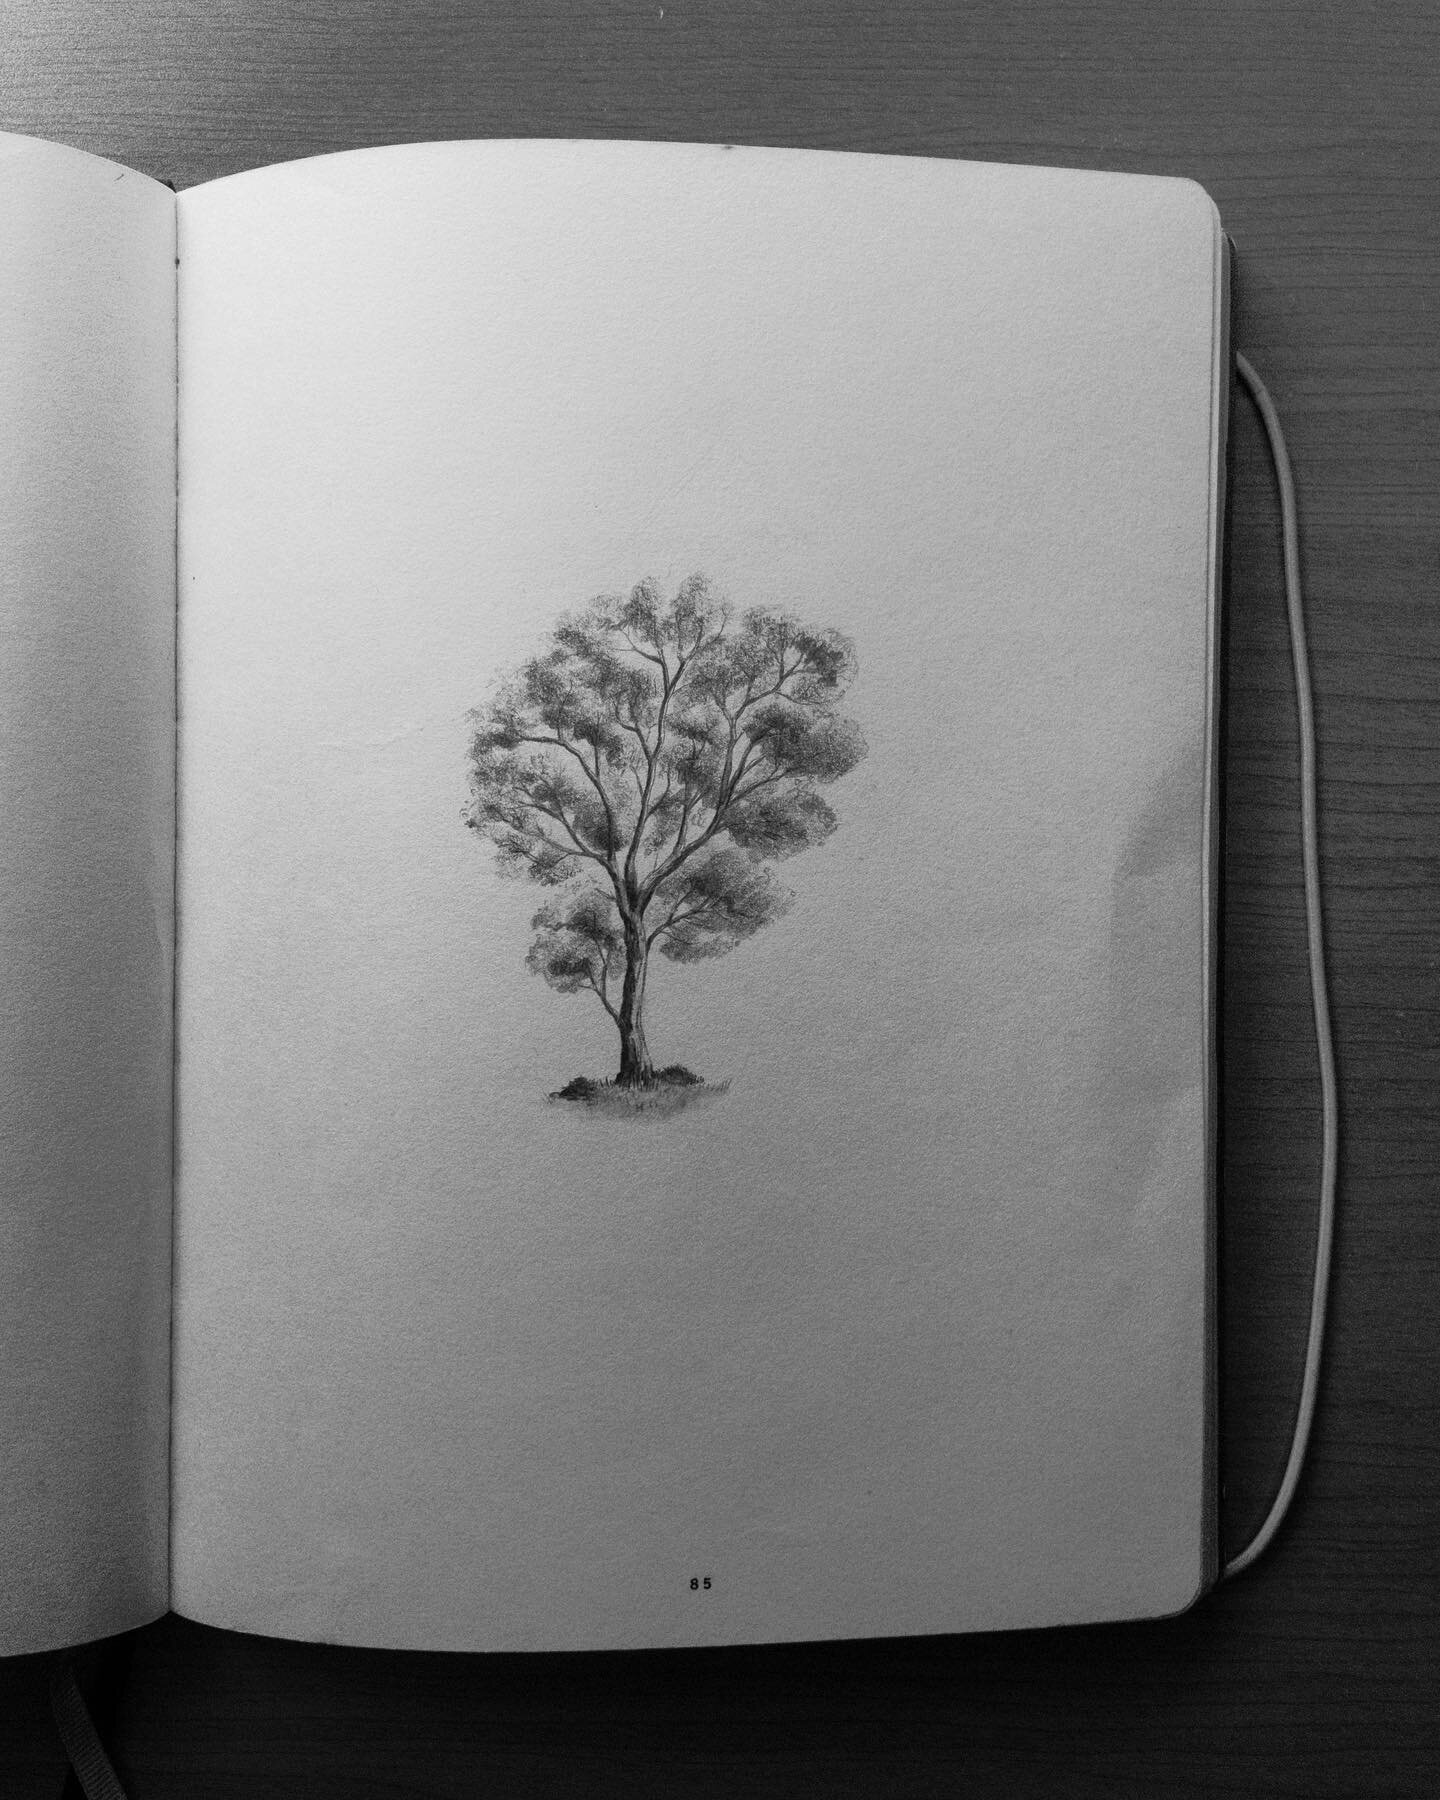 Haven&rsquo;t been finding enough time for some drawing at my desk lately. Managed to squeeze in a little eucalypt before bed though this eve at least. #illustration #sketchbook #drawing #eucalyptus #gumtree #tree